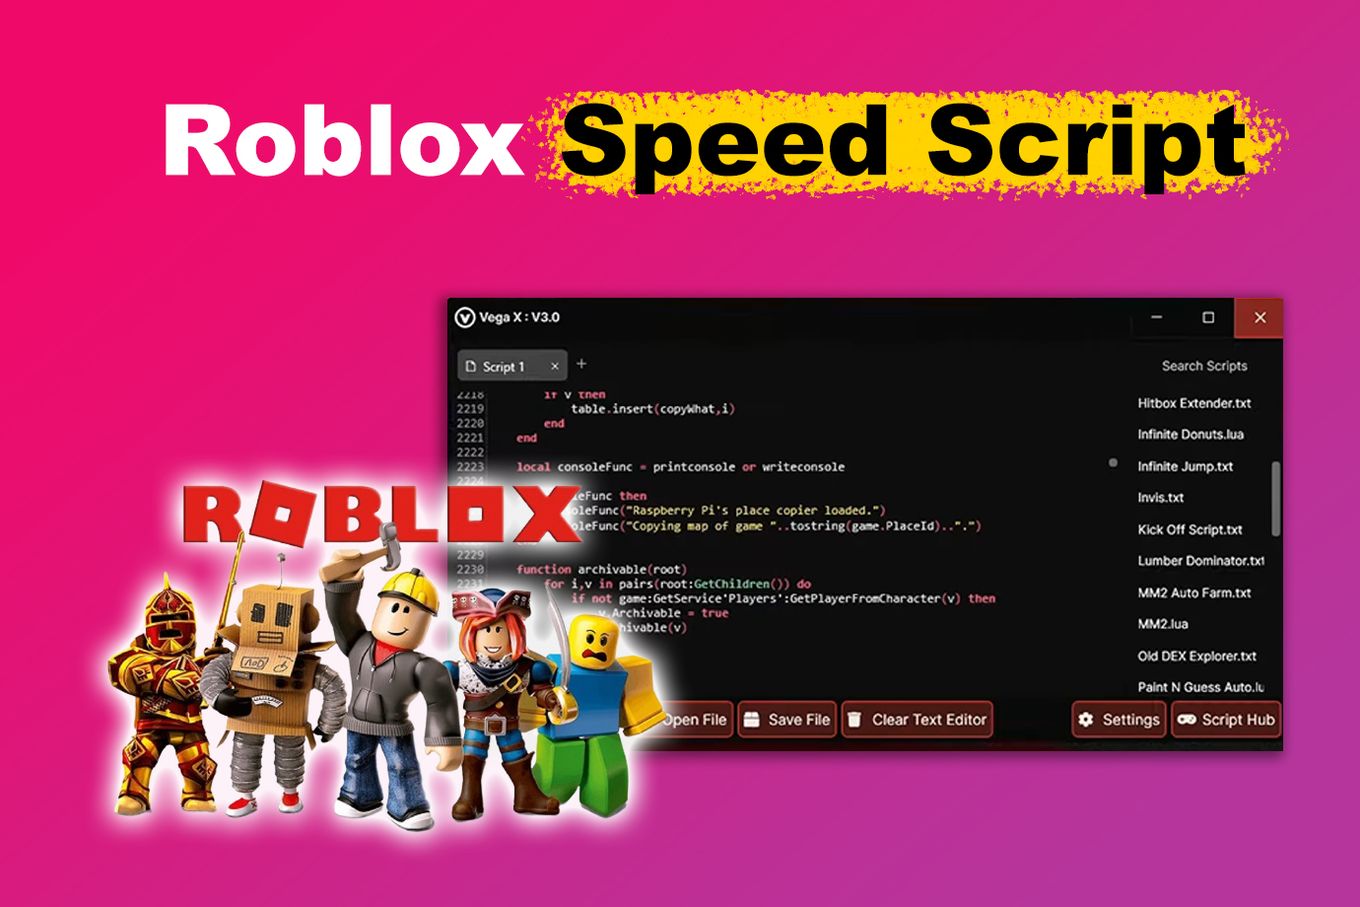 Roblox 'Equip Avatar with items' & How to do it? - Scripting